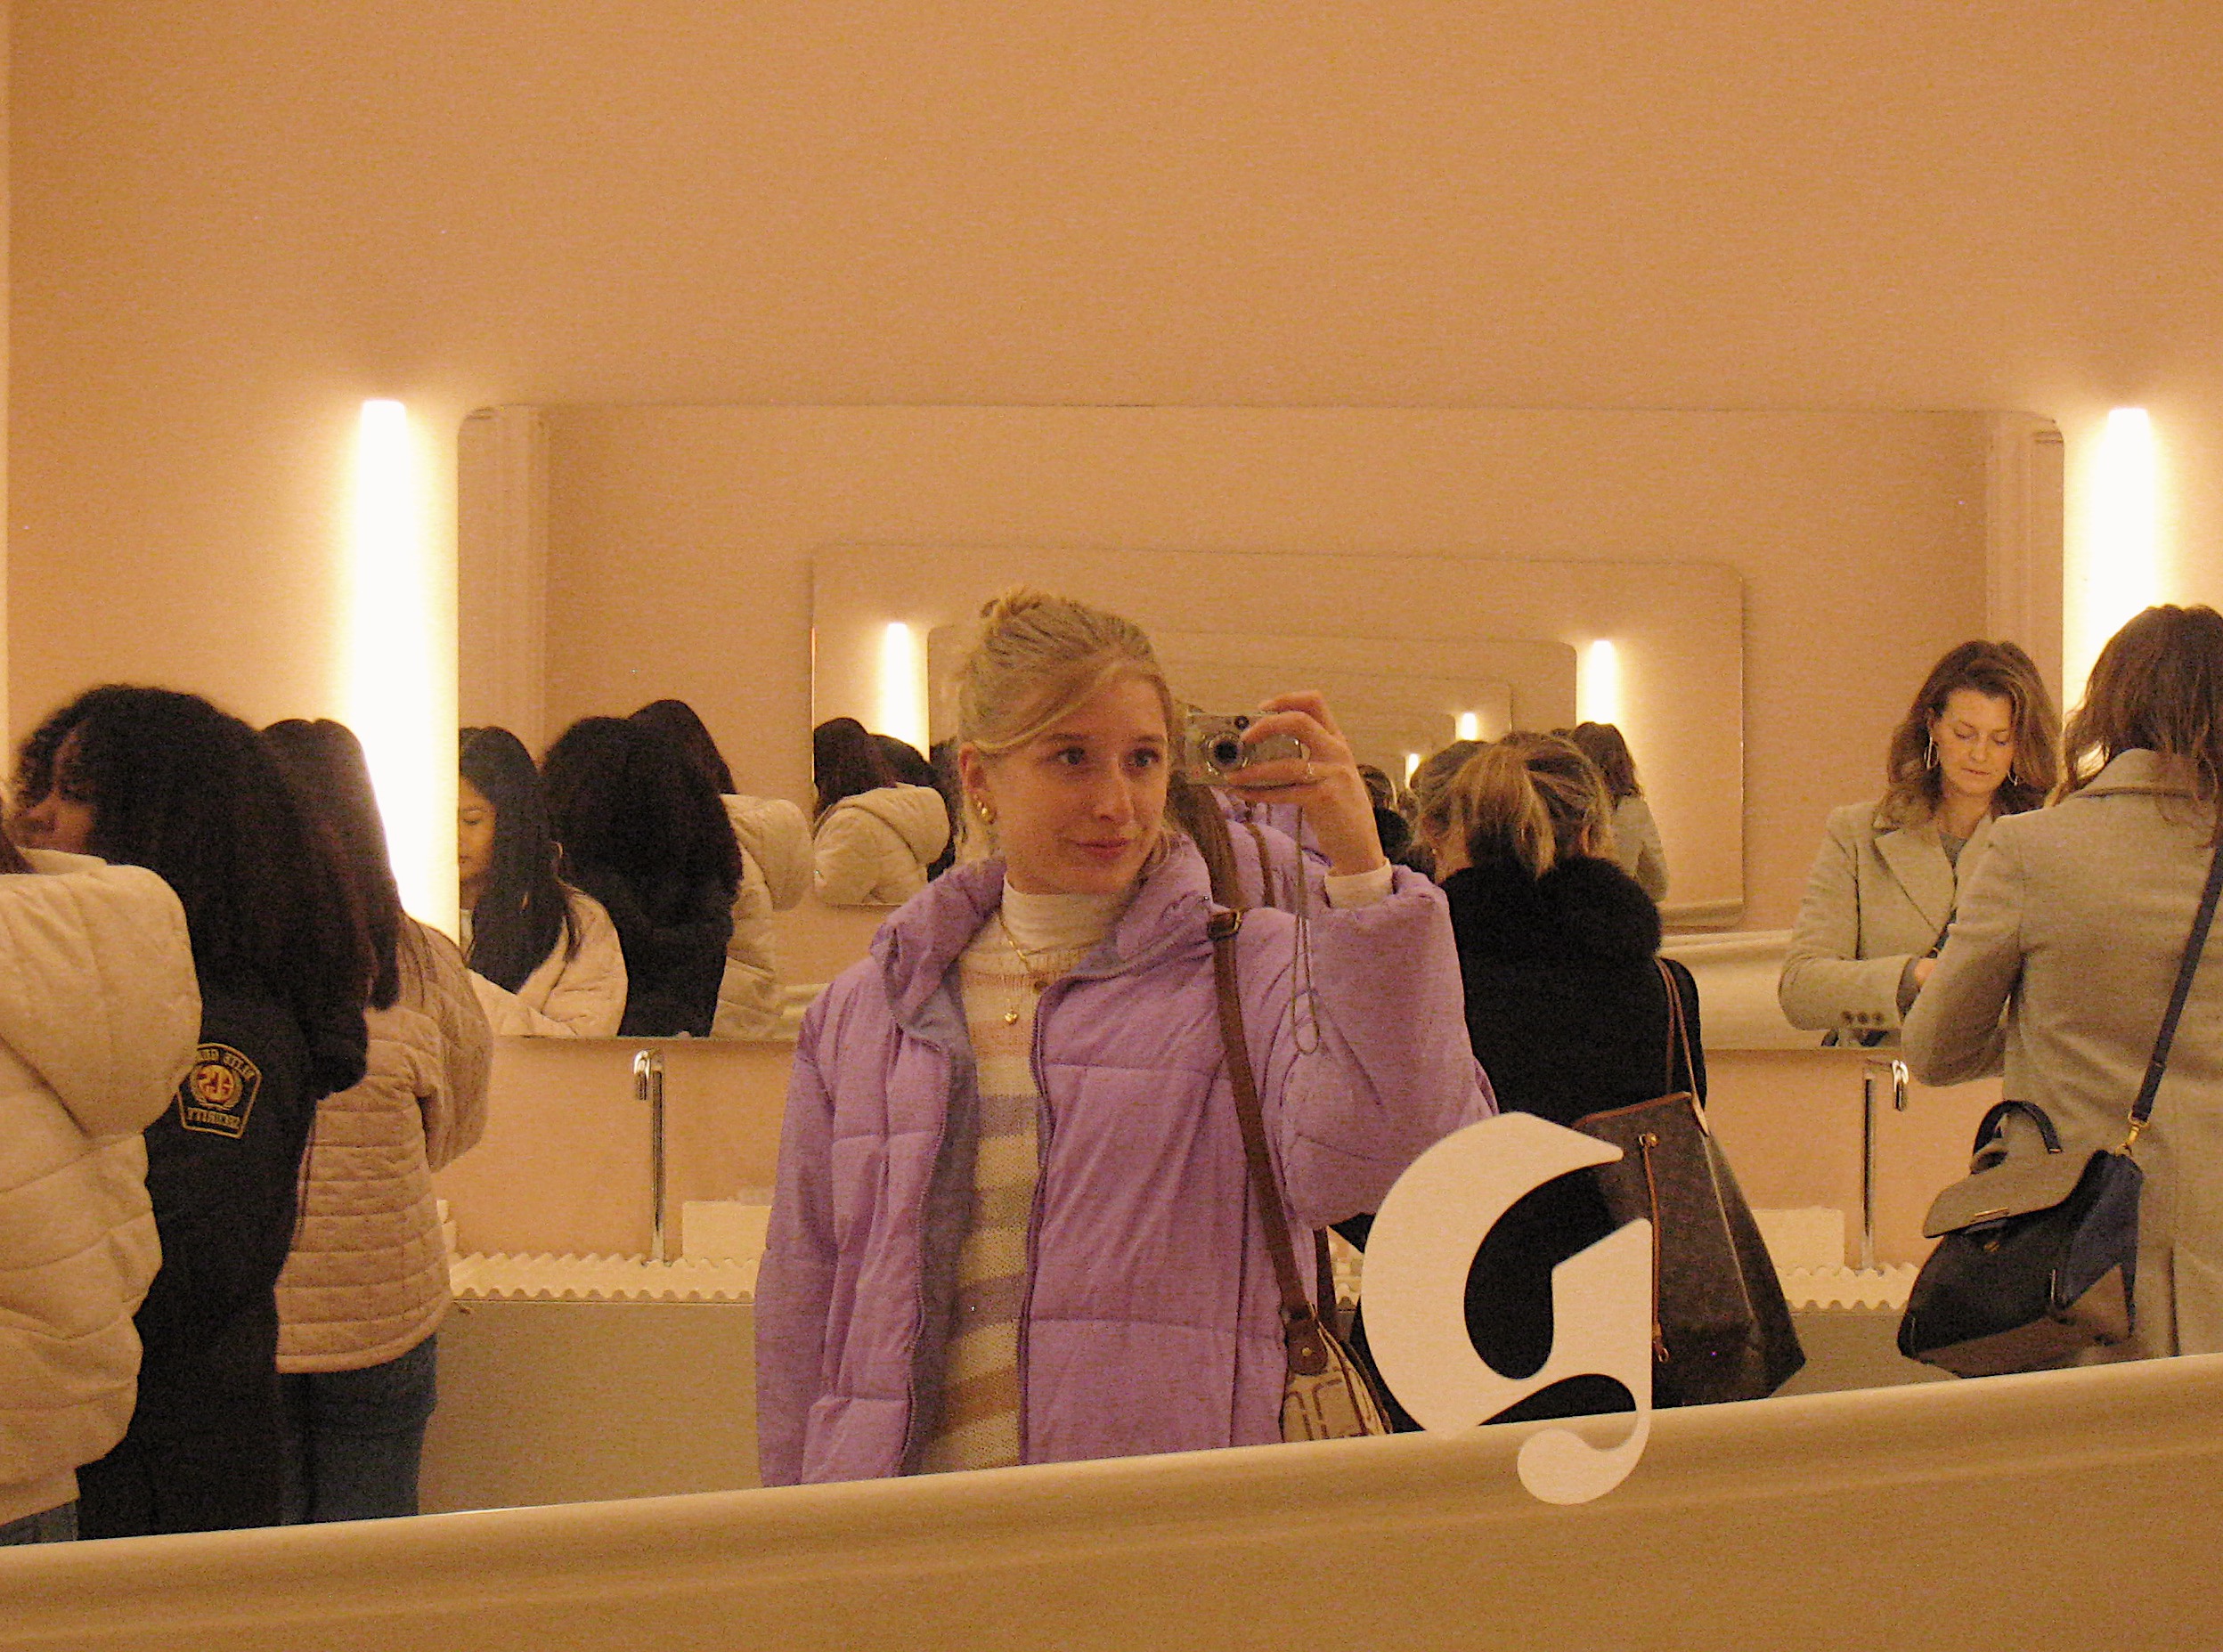 This image depicts a mirror selfie of a 20 year old girl with blonde hair up in a bun, wearing a big purple puffy coat. She is holding a digital camera and posing in the mirror of a makeup store. The walls are all a cream ish beige color.